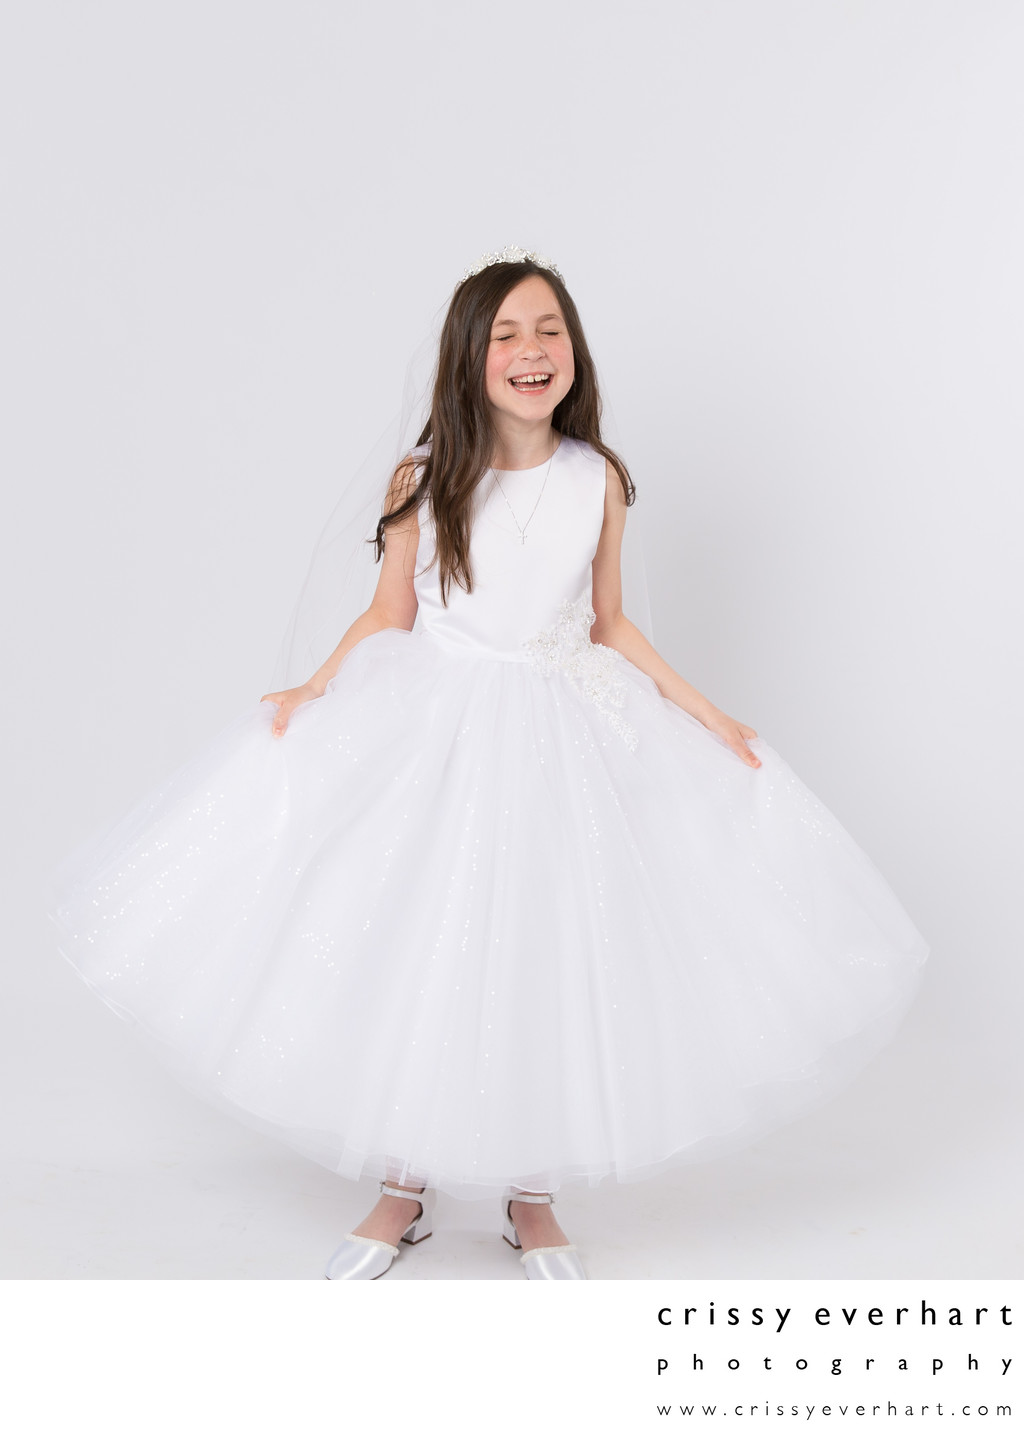 First Communion Portraits on White Backdrop